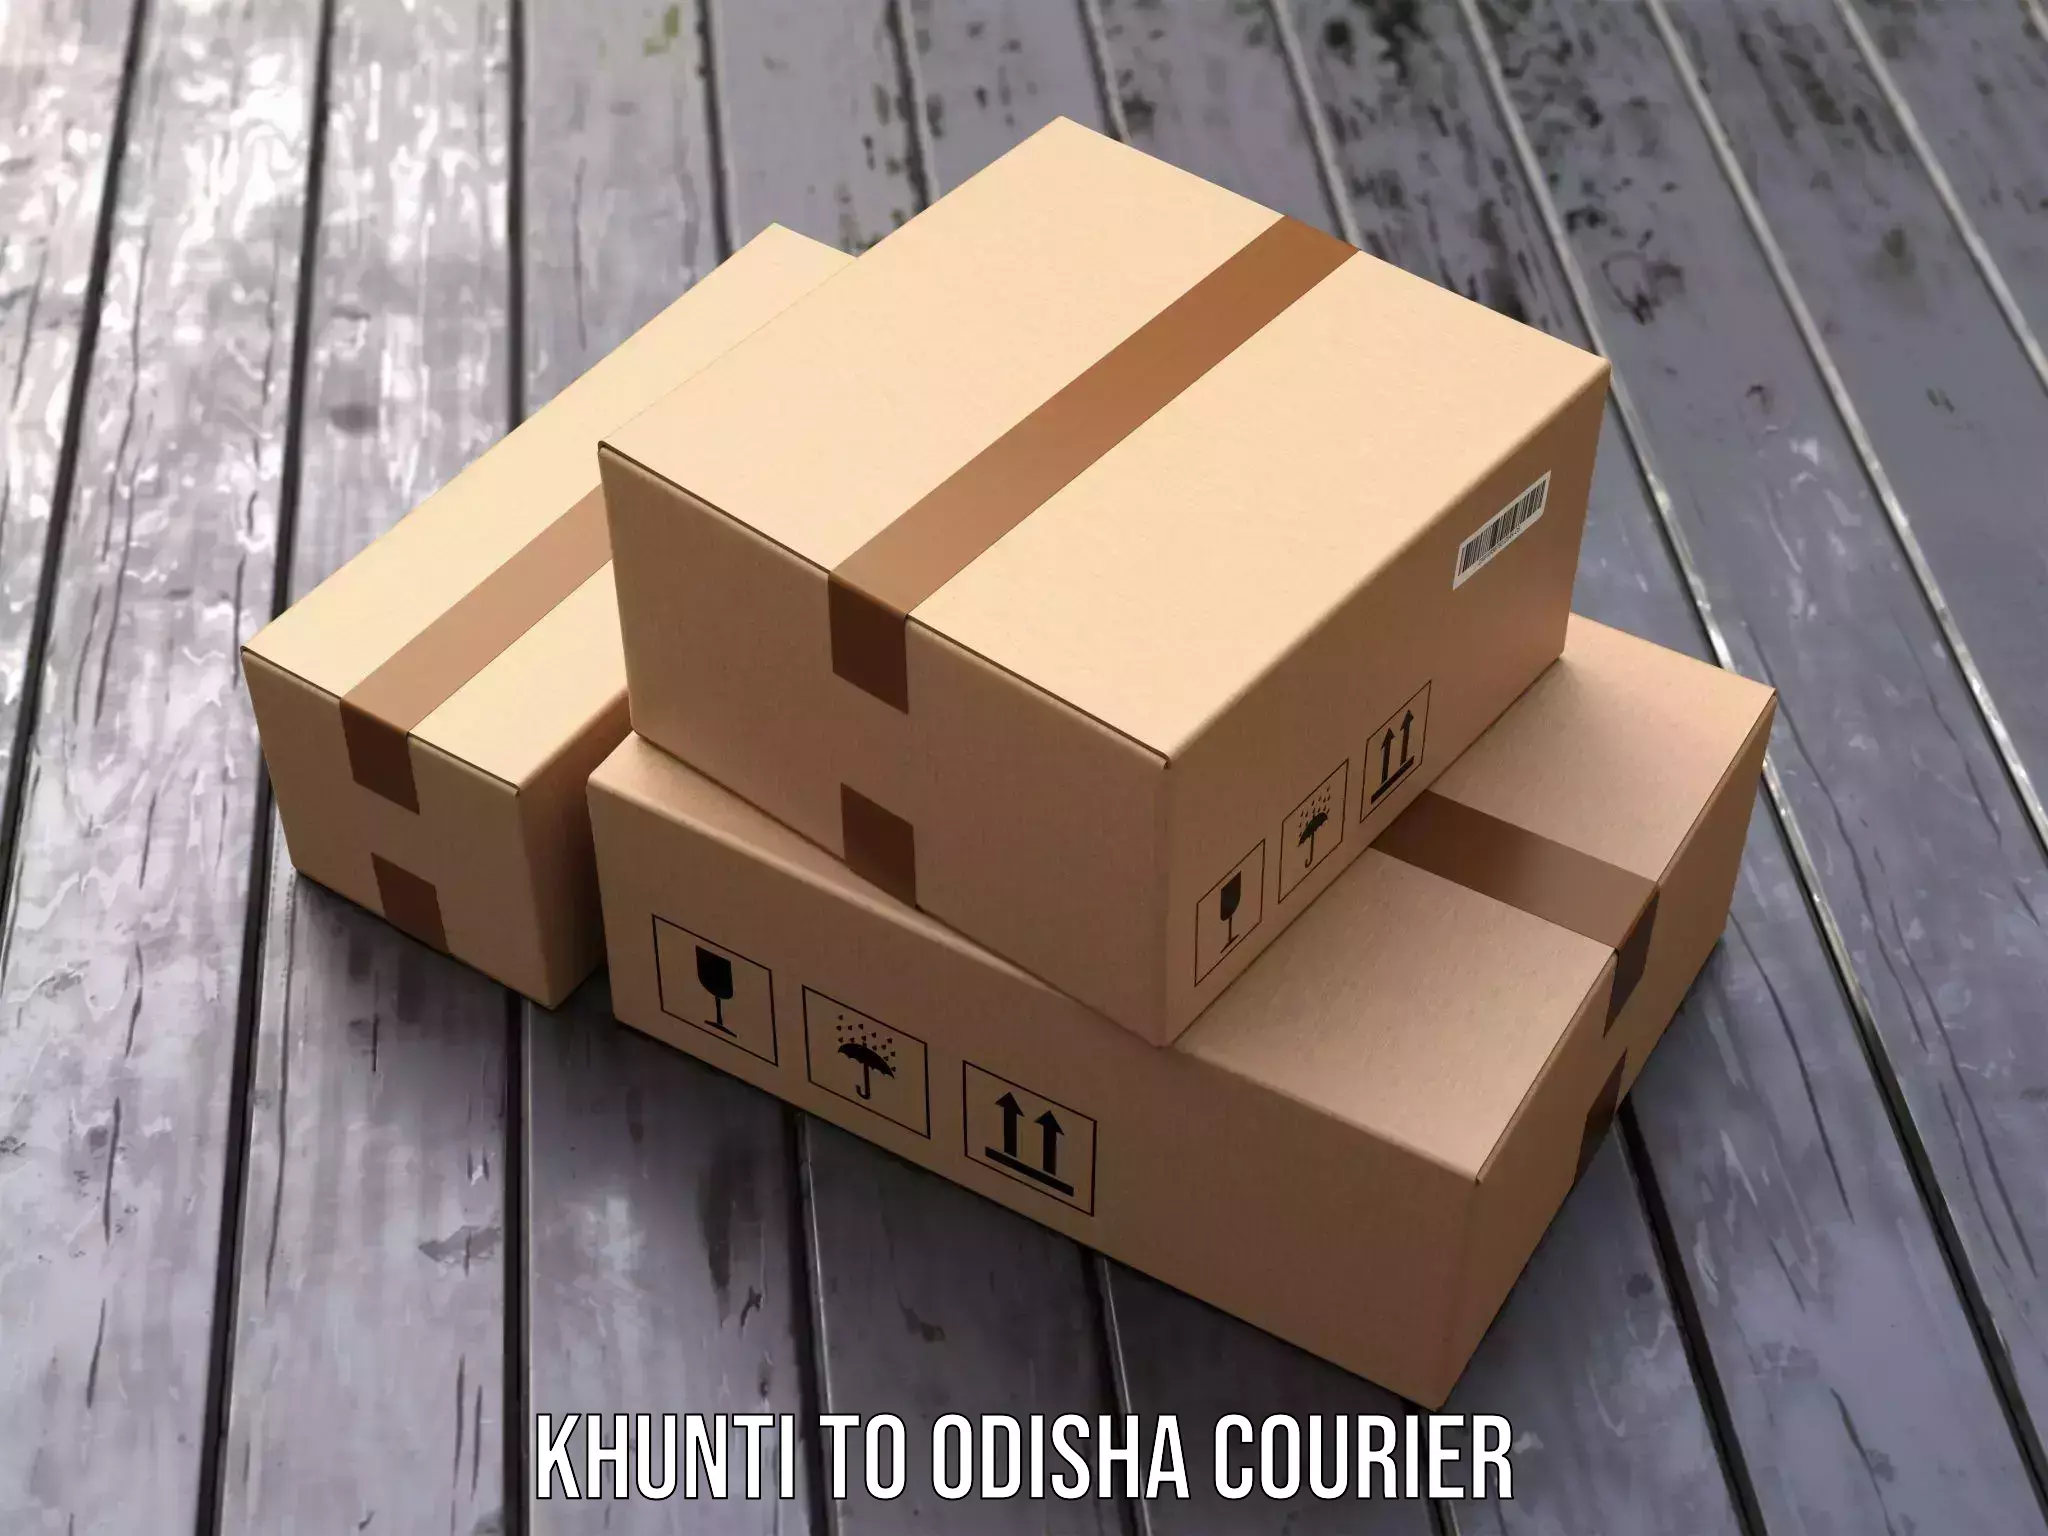 State-of-the-art courier technology Khunti to Baripada